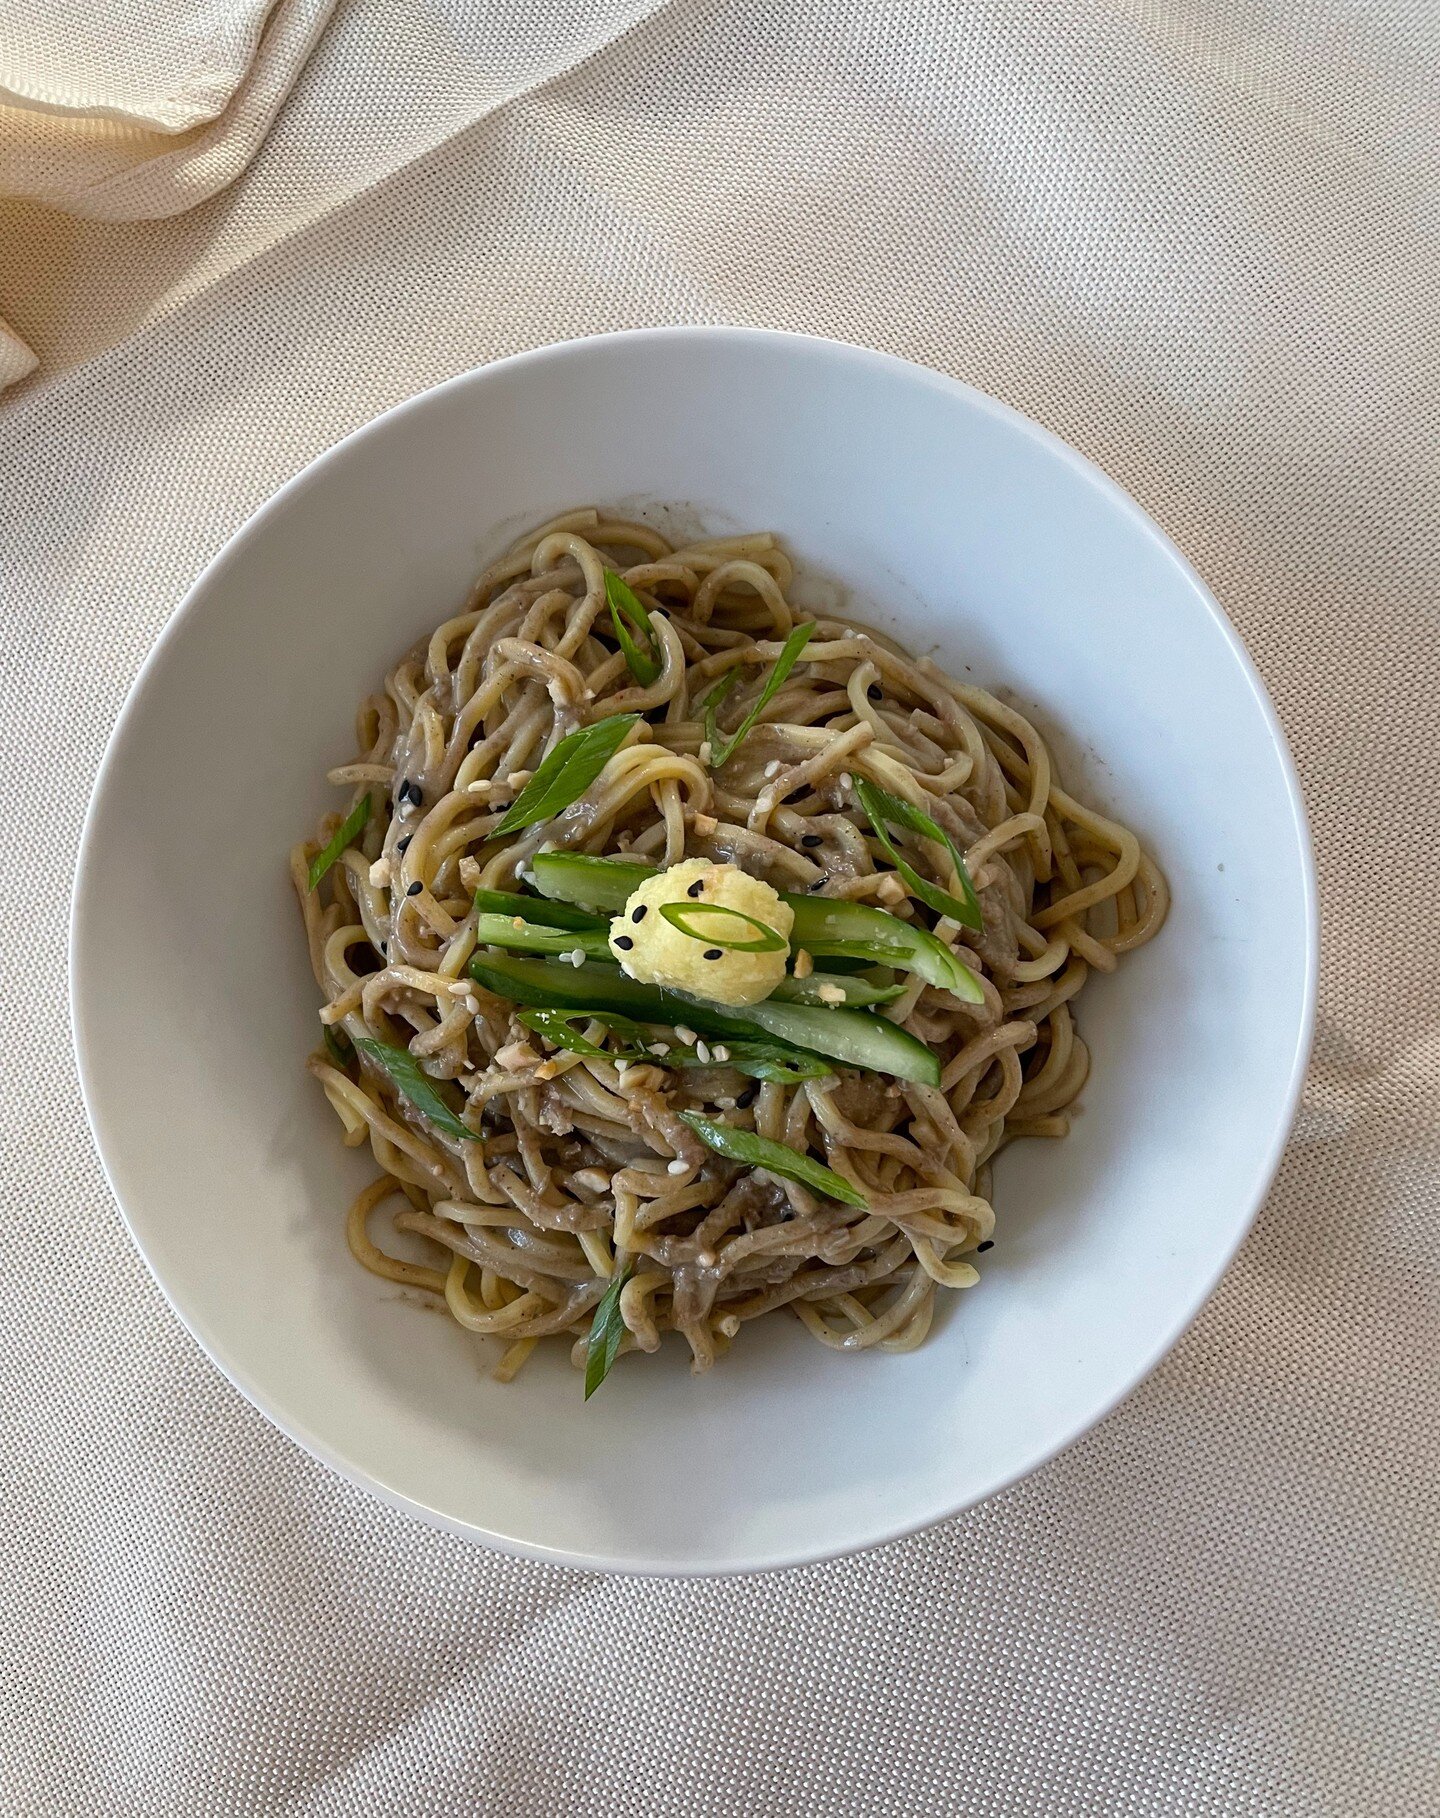 A new take on cold sesame noodles that I grew up eating, mostly from the 7/11 on my grandma&rsquo;s block in Taipei. Instead of the regular white sesame seeds, I use a blend of both white and black for a nutty flavor and the vibrant black color. The 